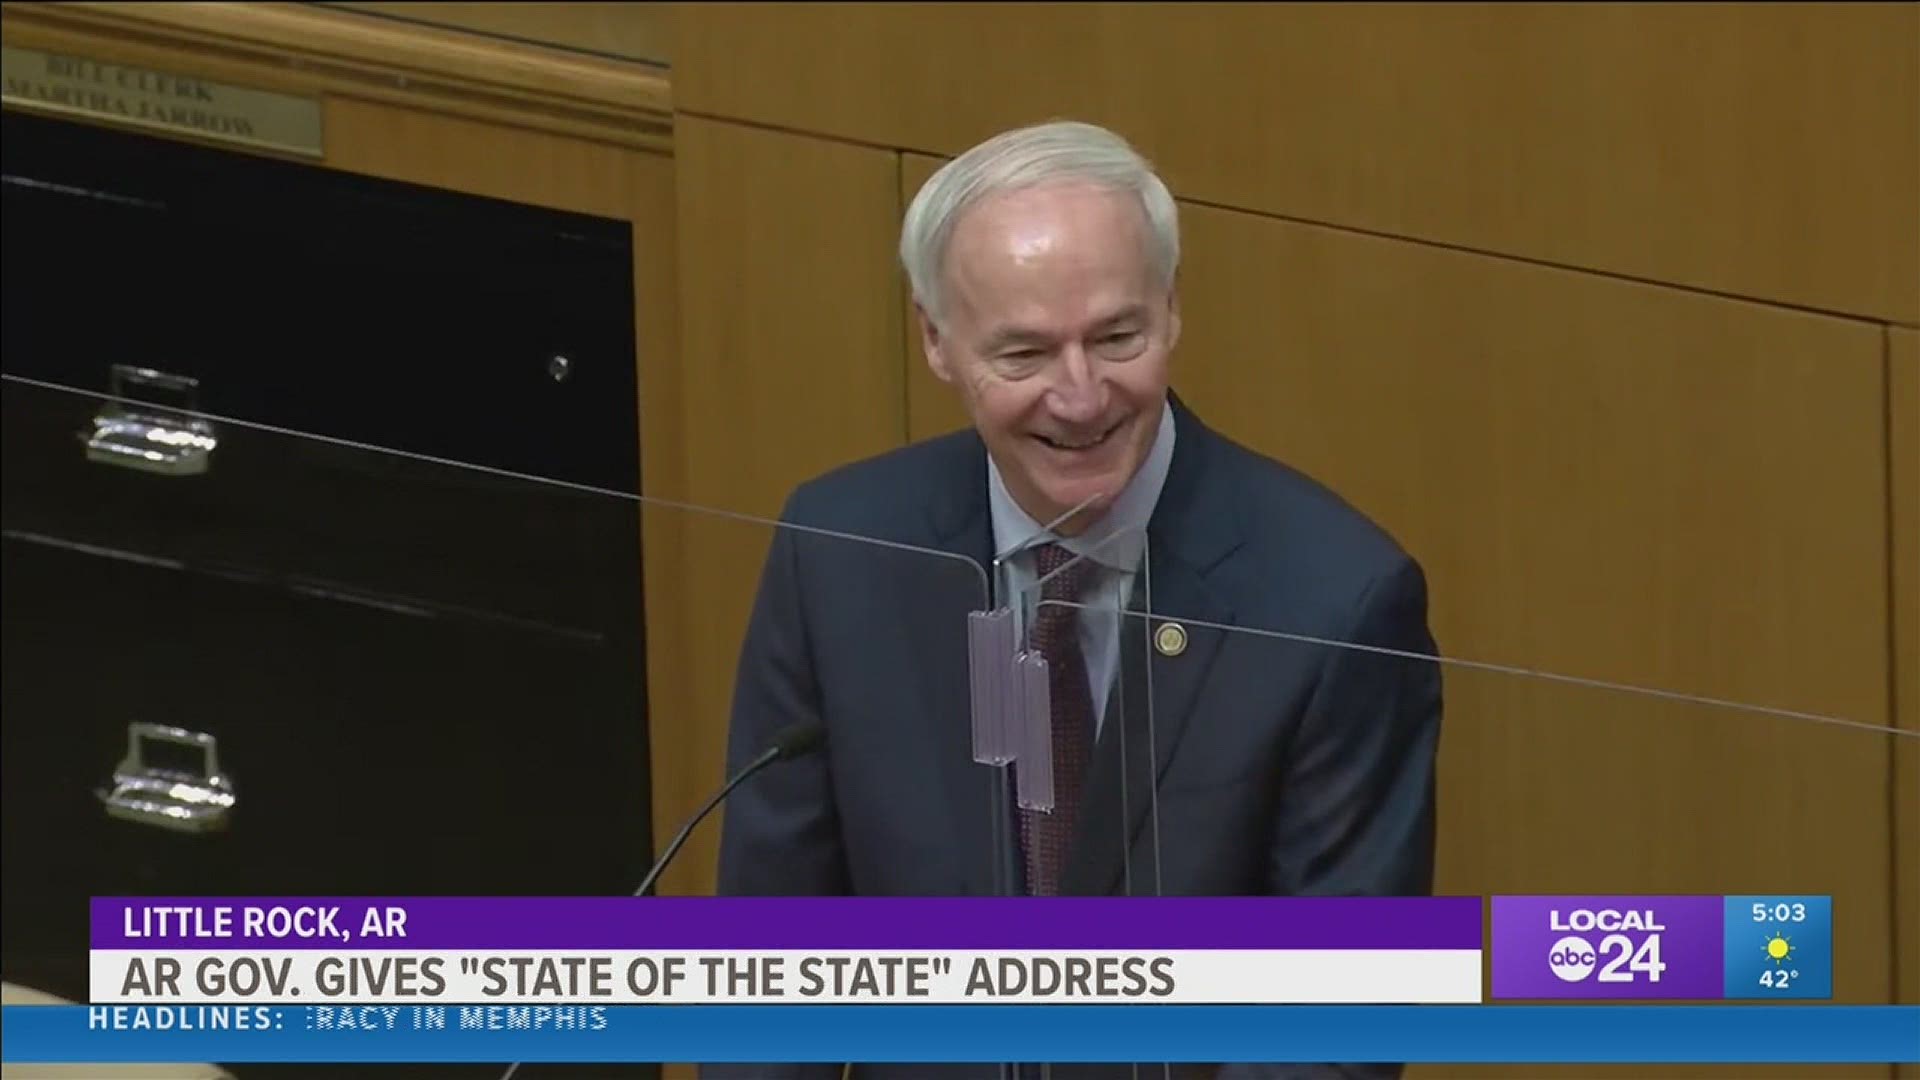 Gov. Asa Hutchinson provided the State of the State Address on Tuesday morning, Jan. 12 to members of the Arkansas General Assembly.